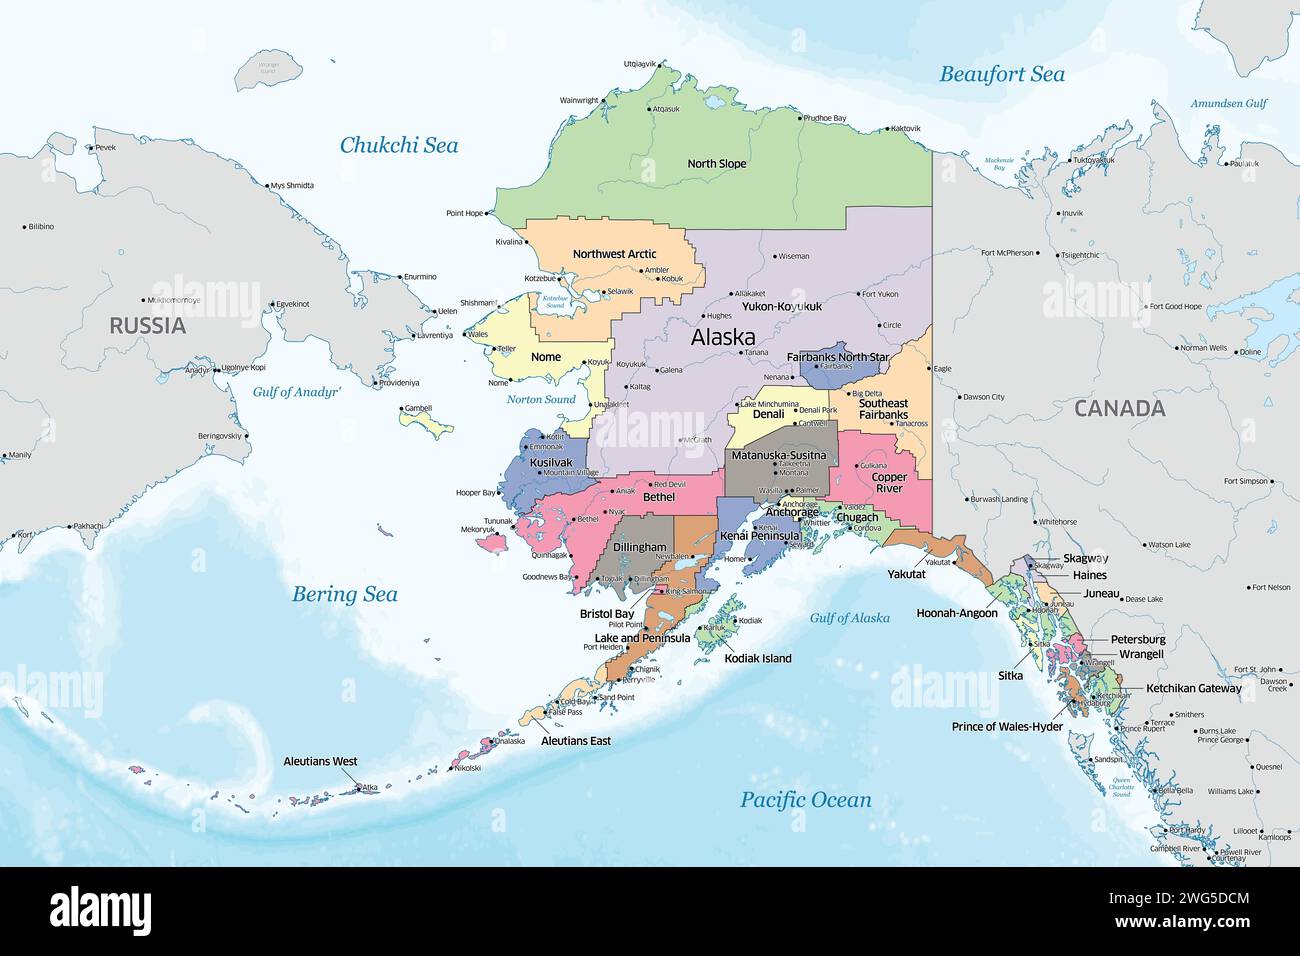 Political map showing the counties that make up the state of Alaska in the United States Stock Photo